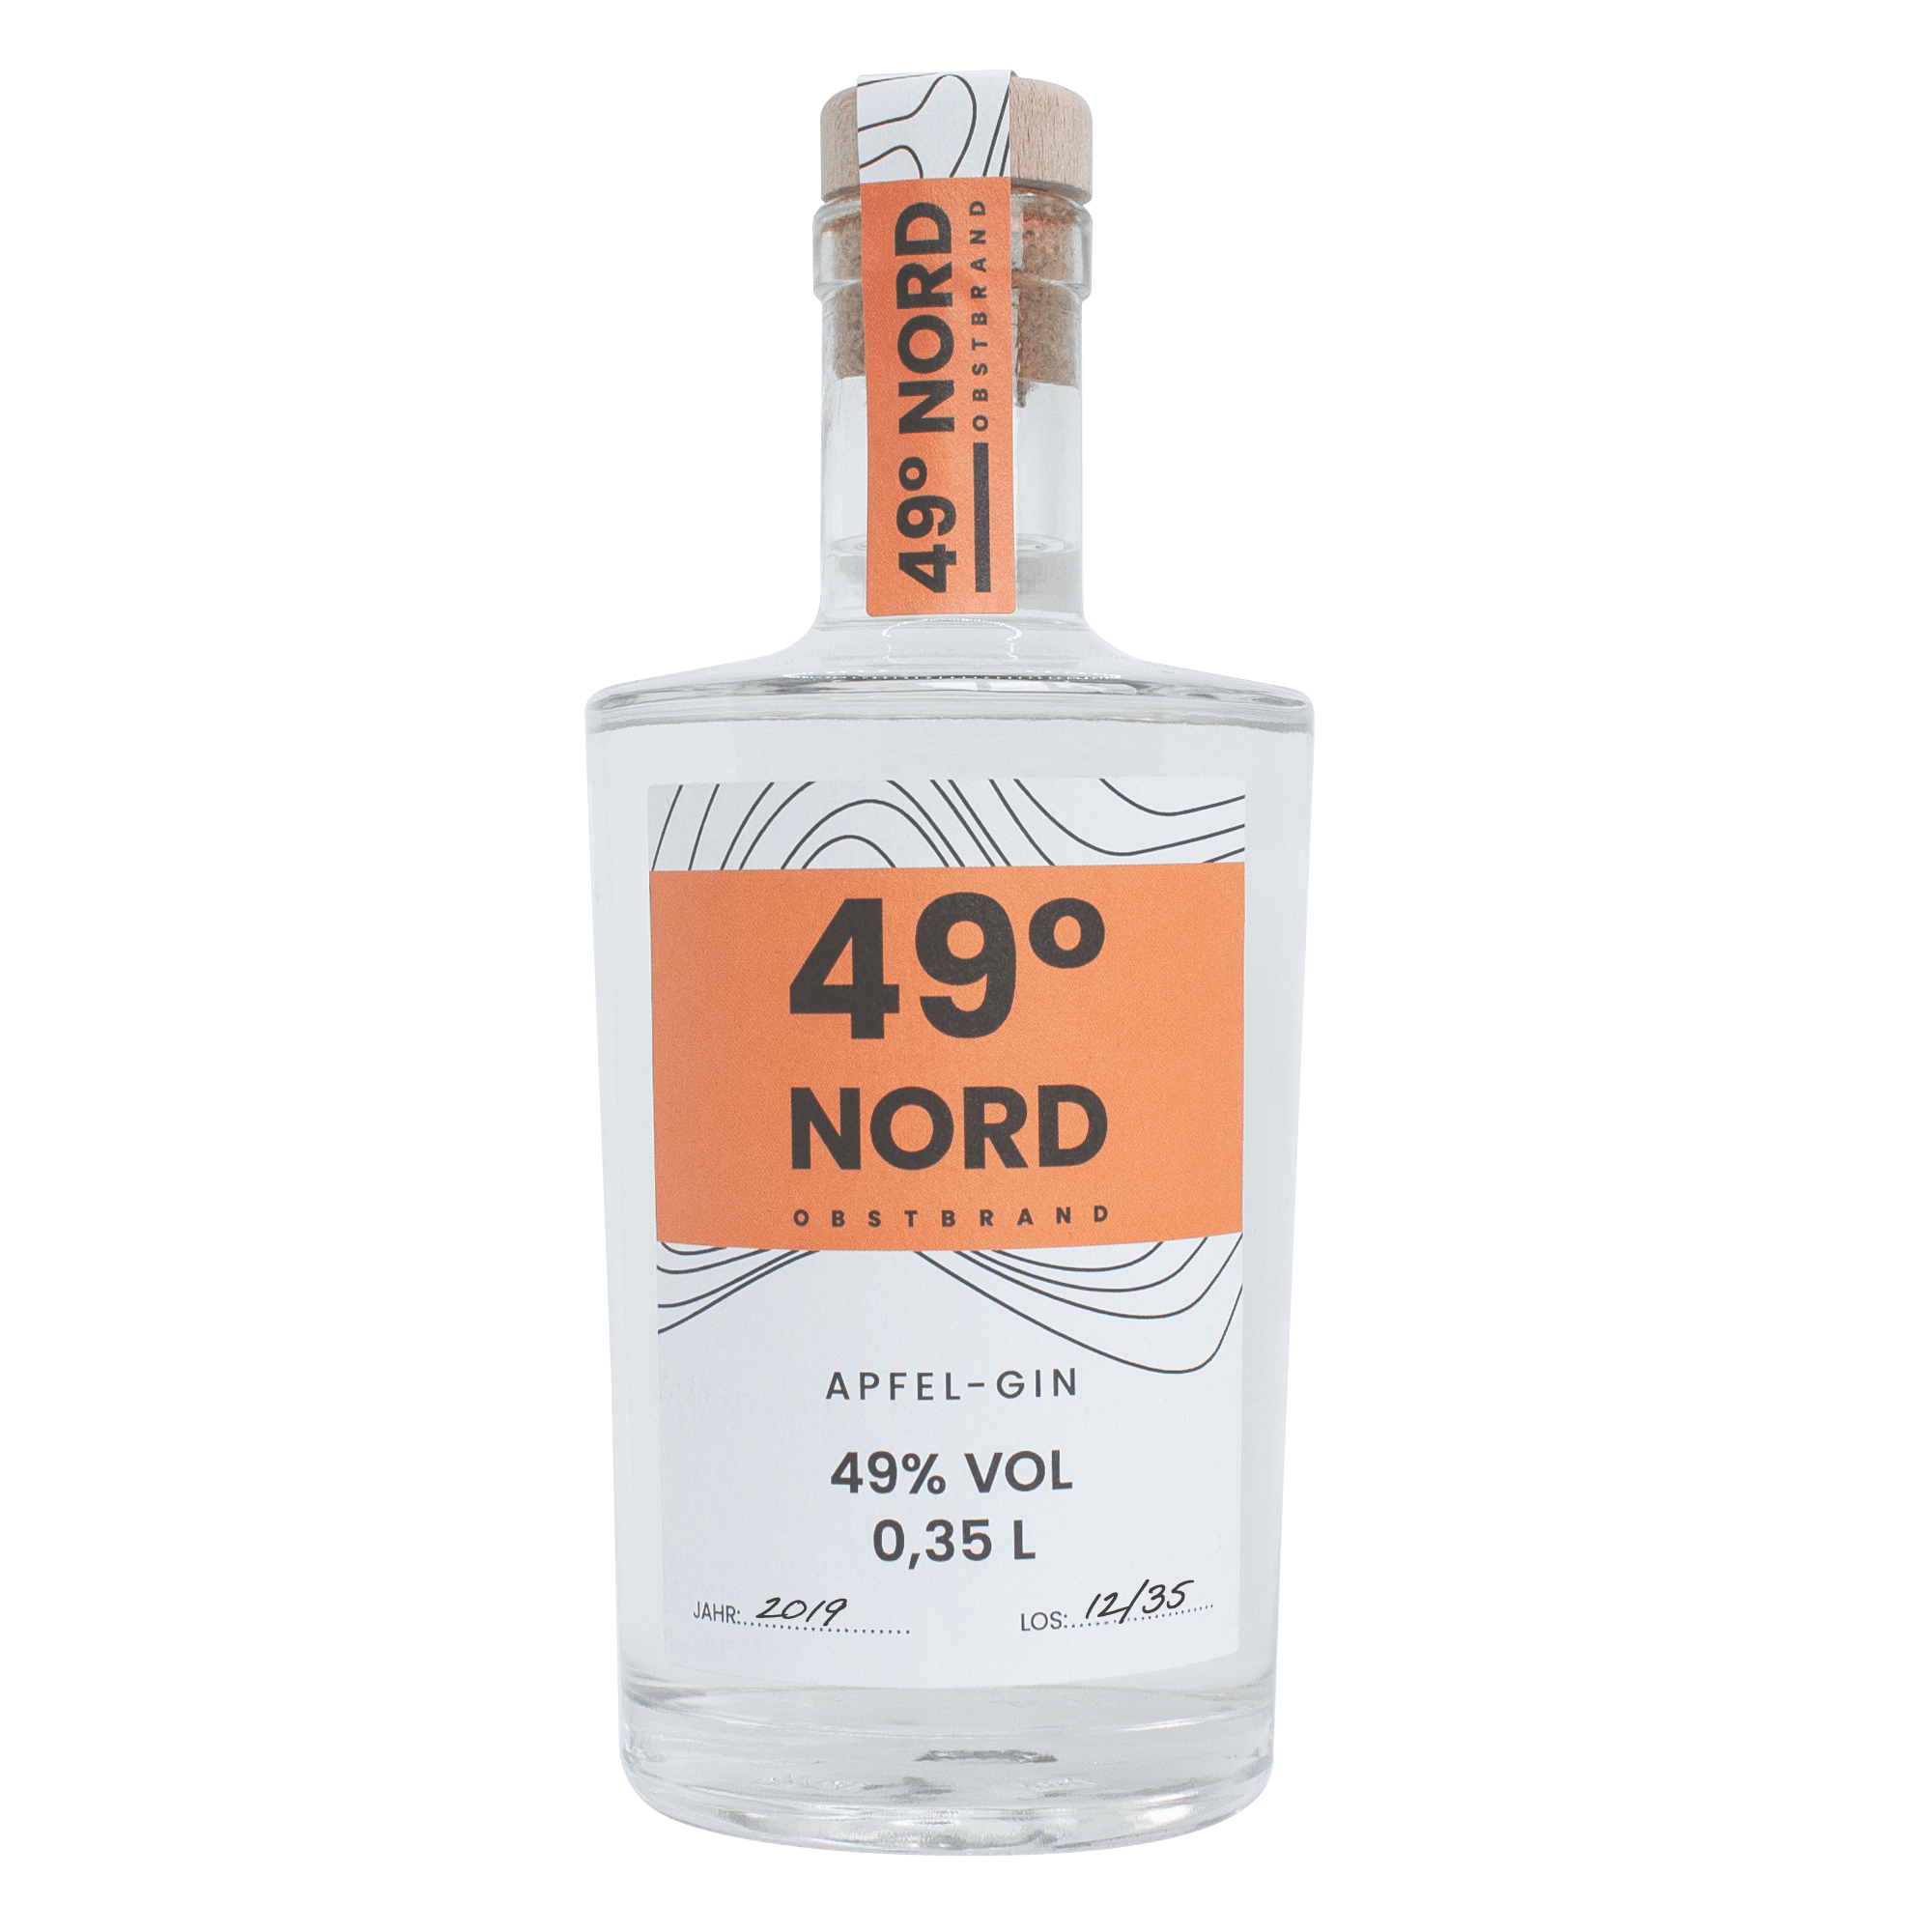 49° Nord Obstbrand Nord 49° – Apfel-Gin